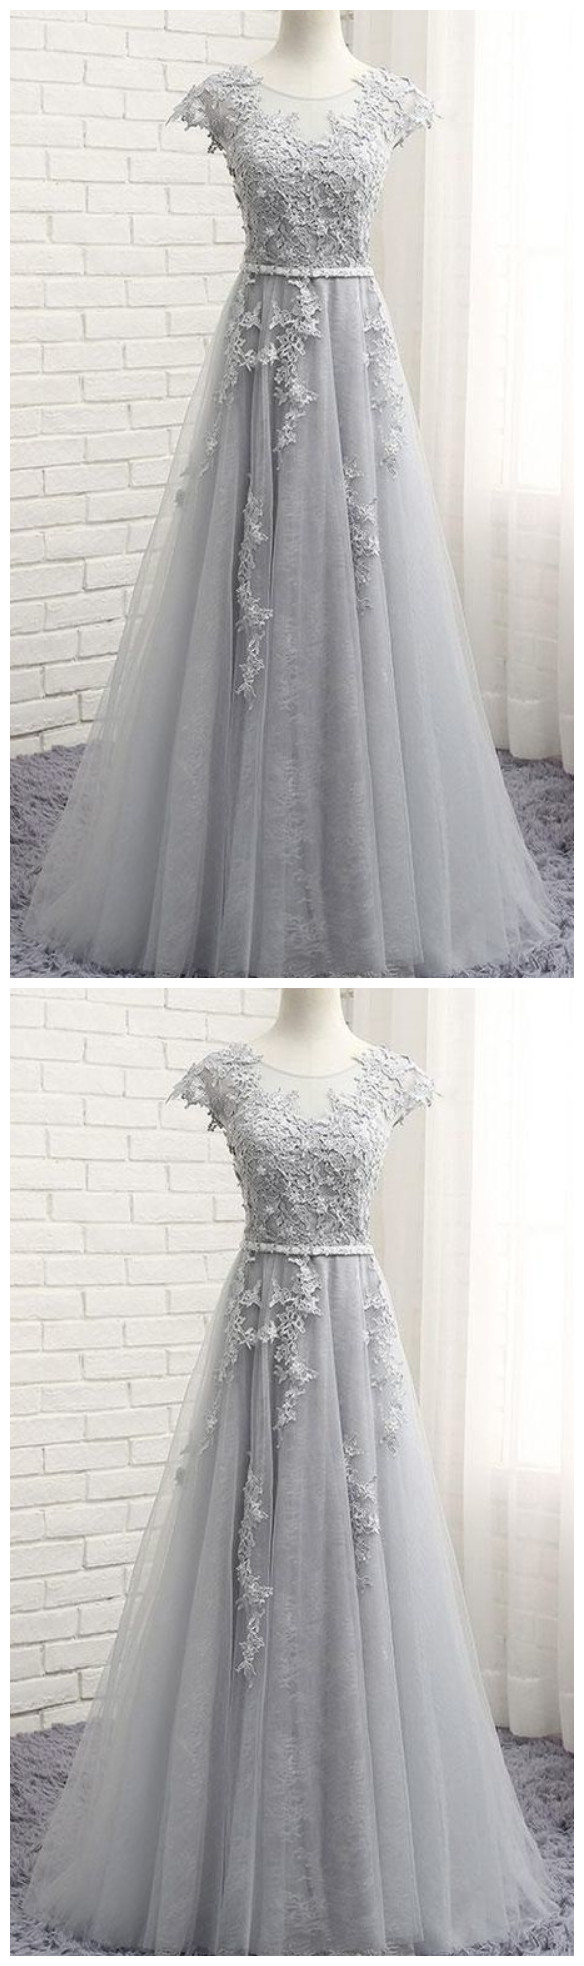 Gray Round Neck Lace Applique Long Prom Dress, Gray Evening Dress